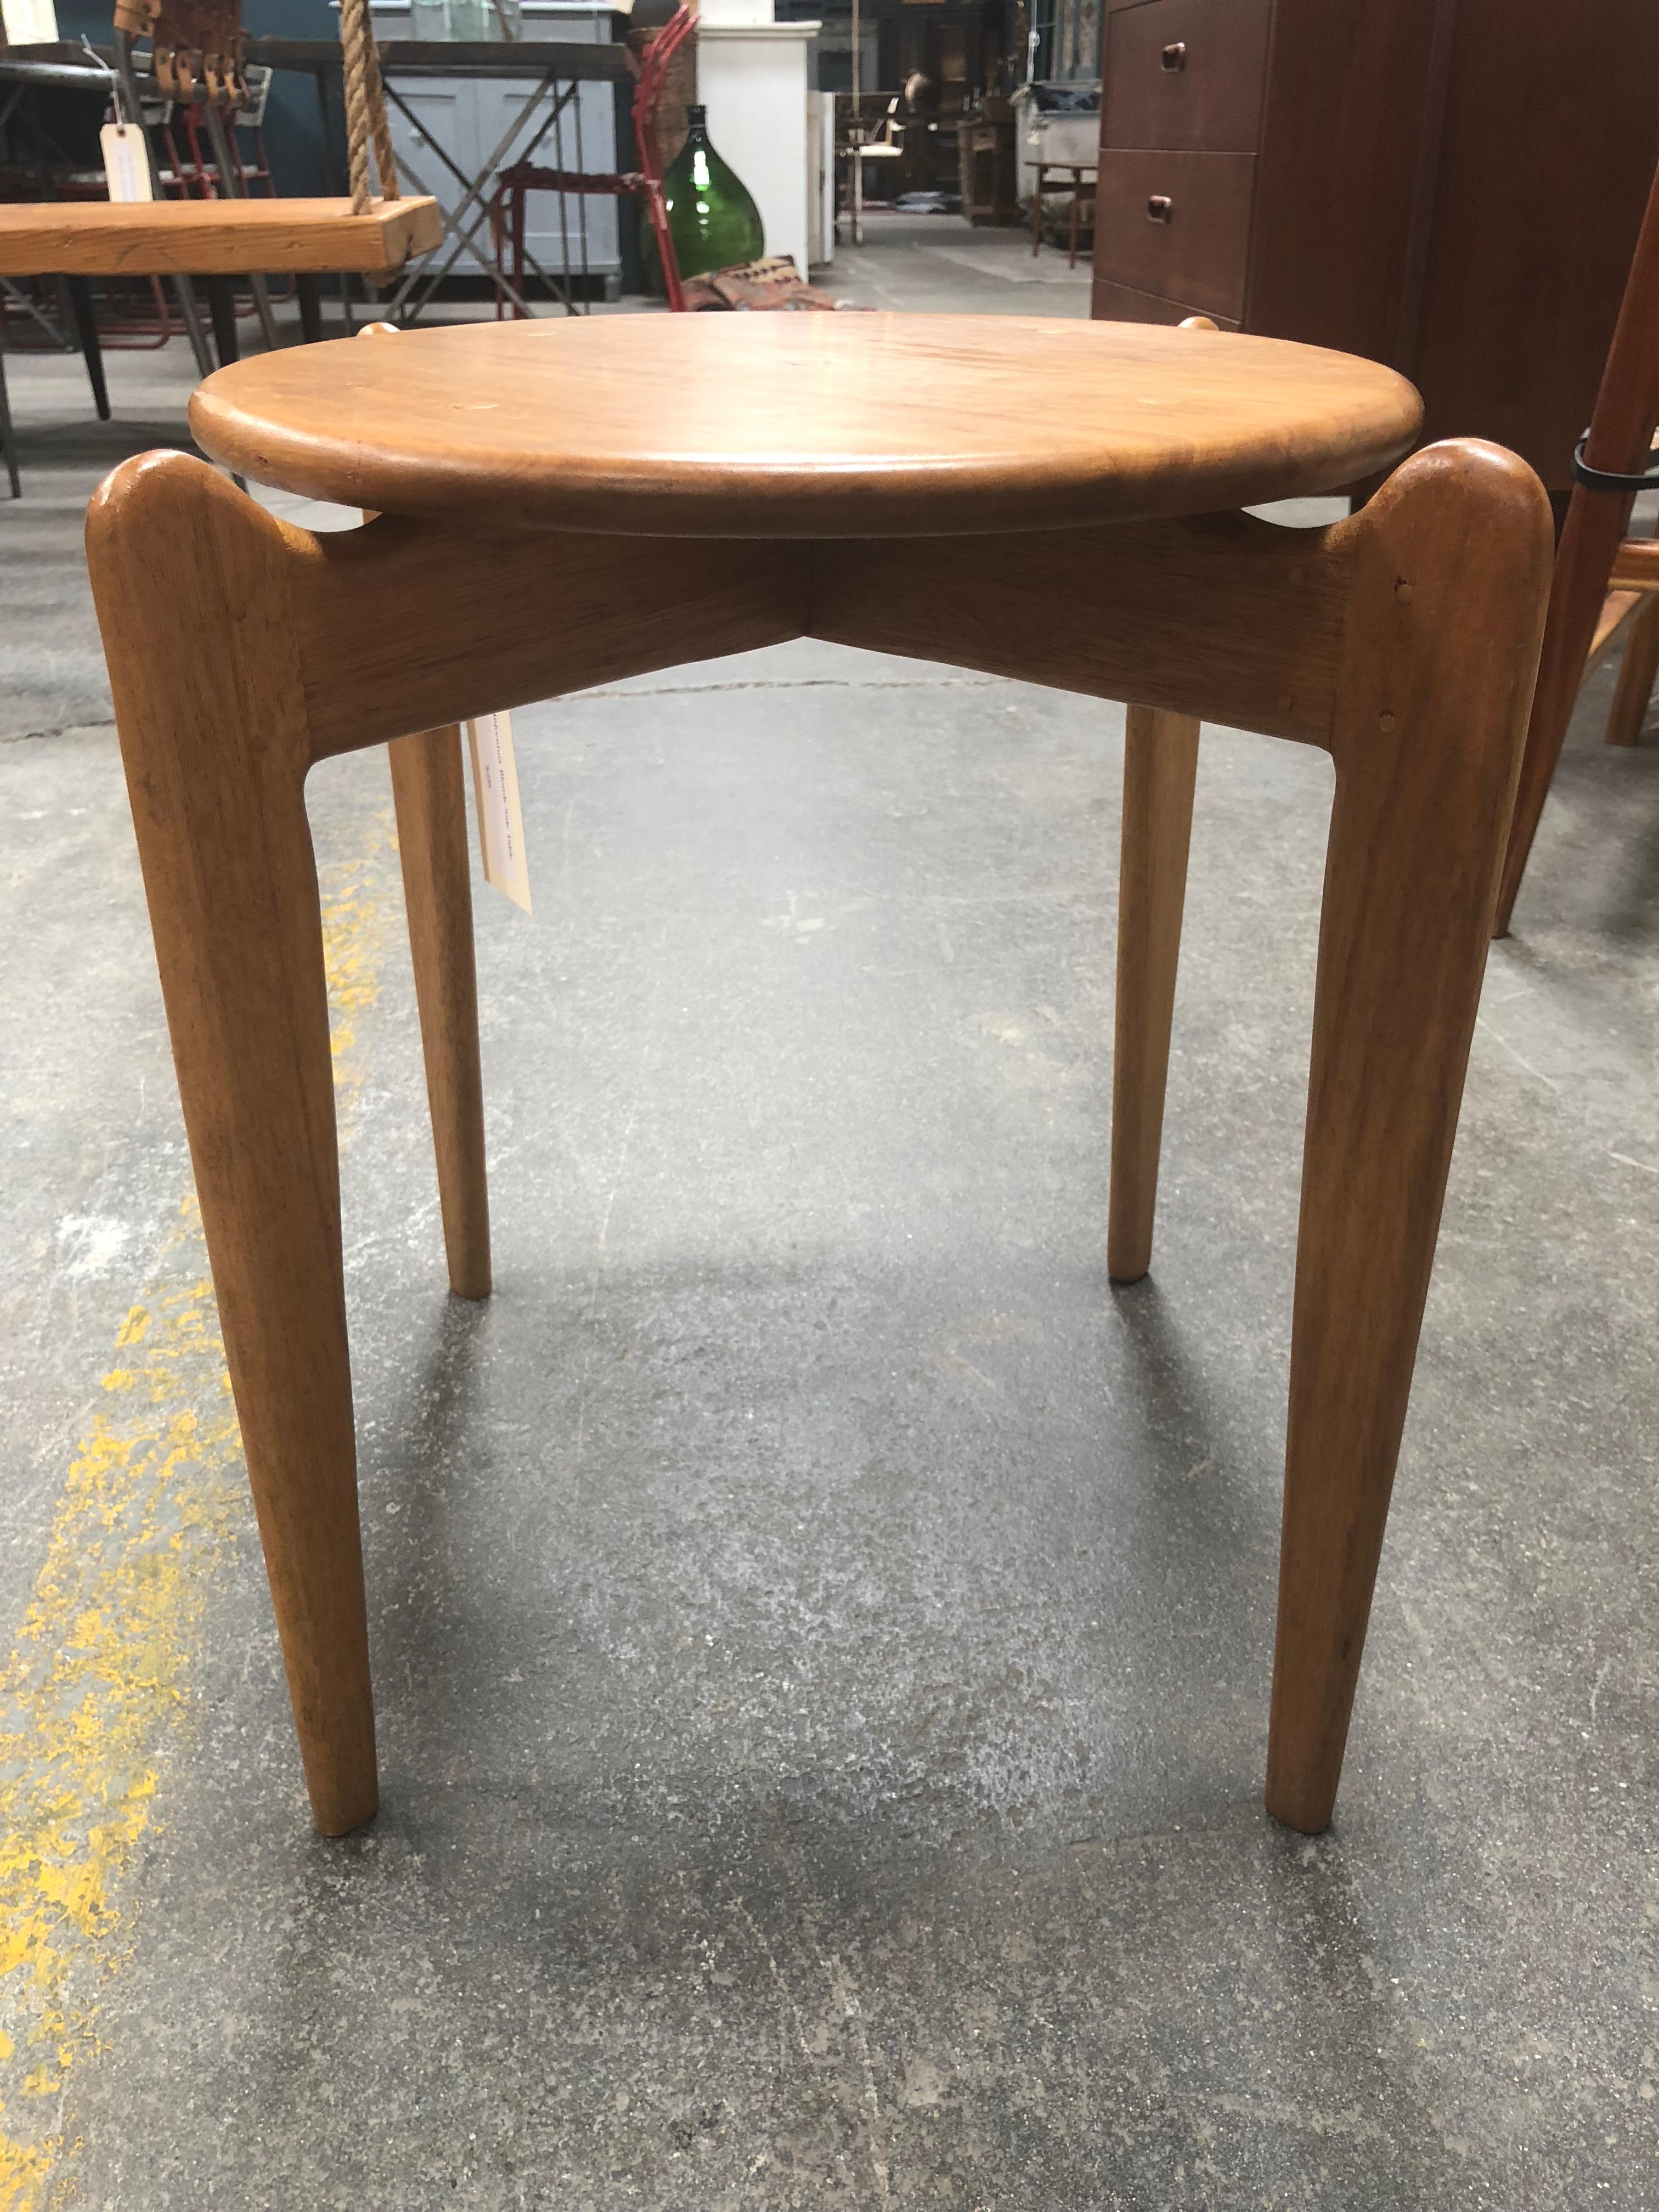 Charming midcentury Danish end table, for end of a sofa or bedside.